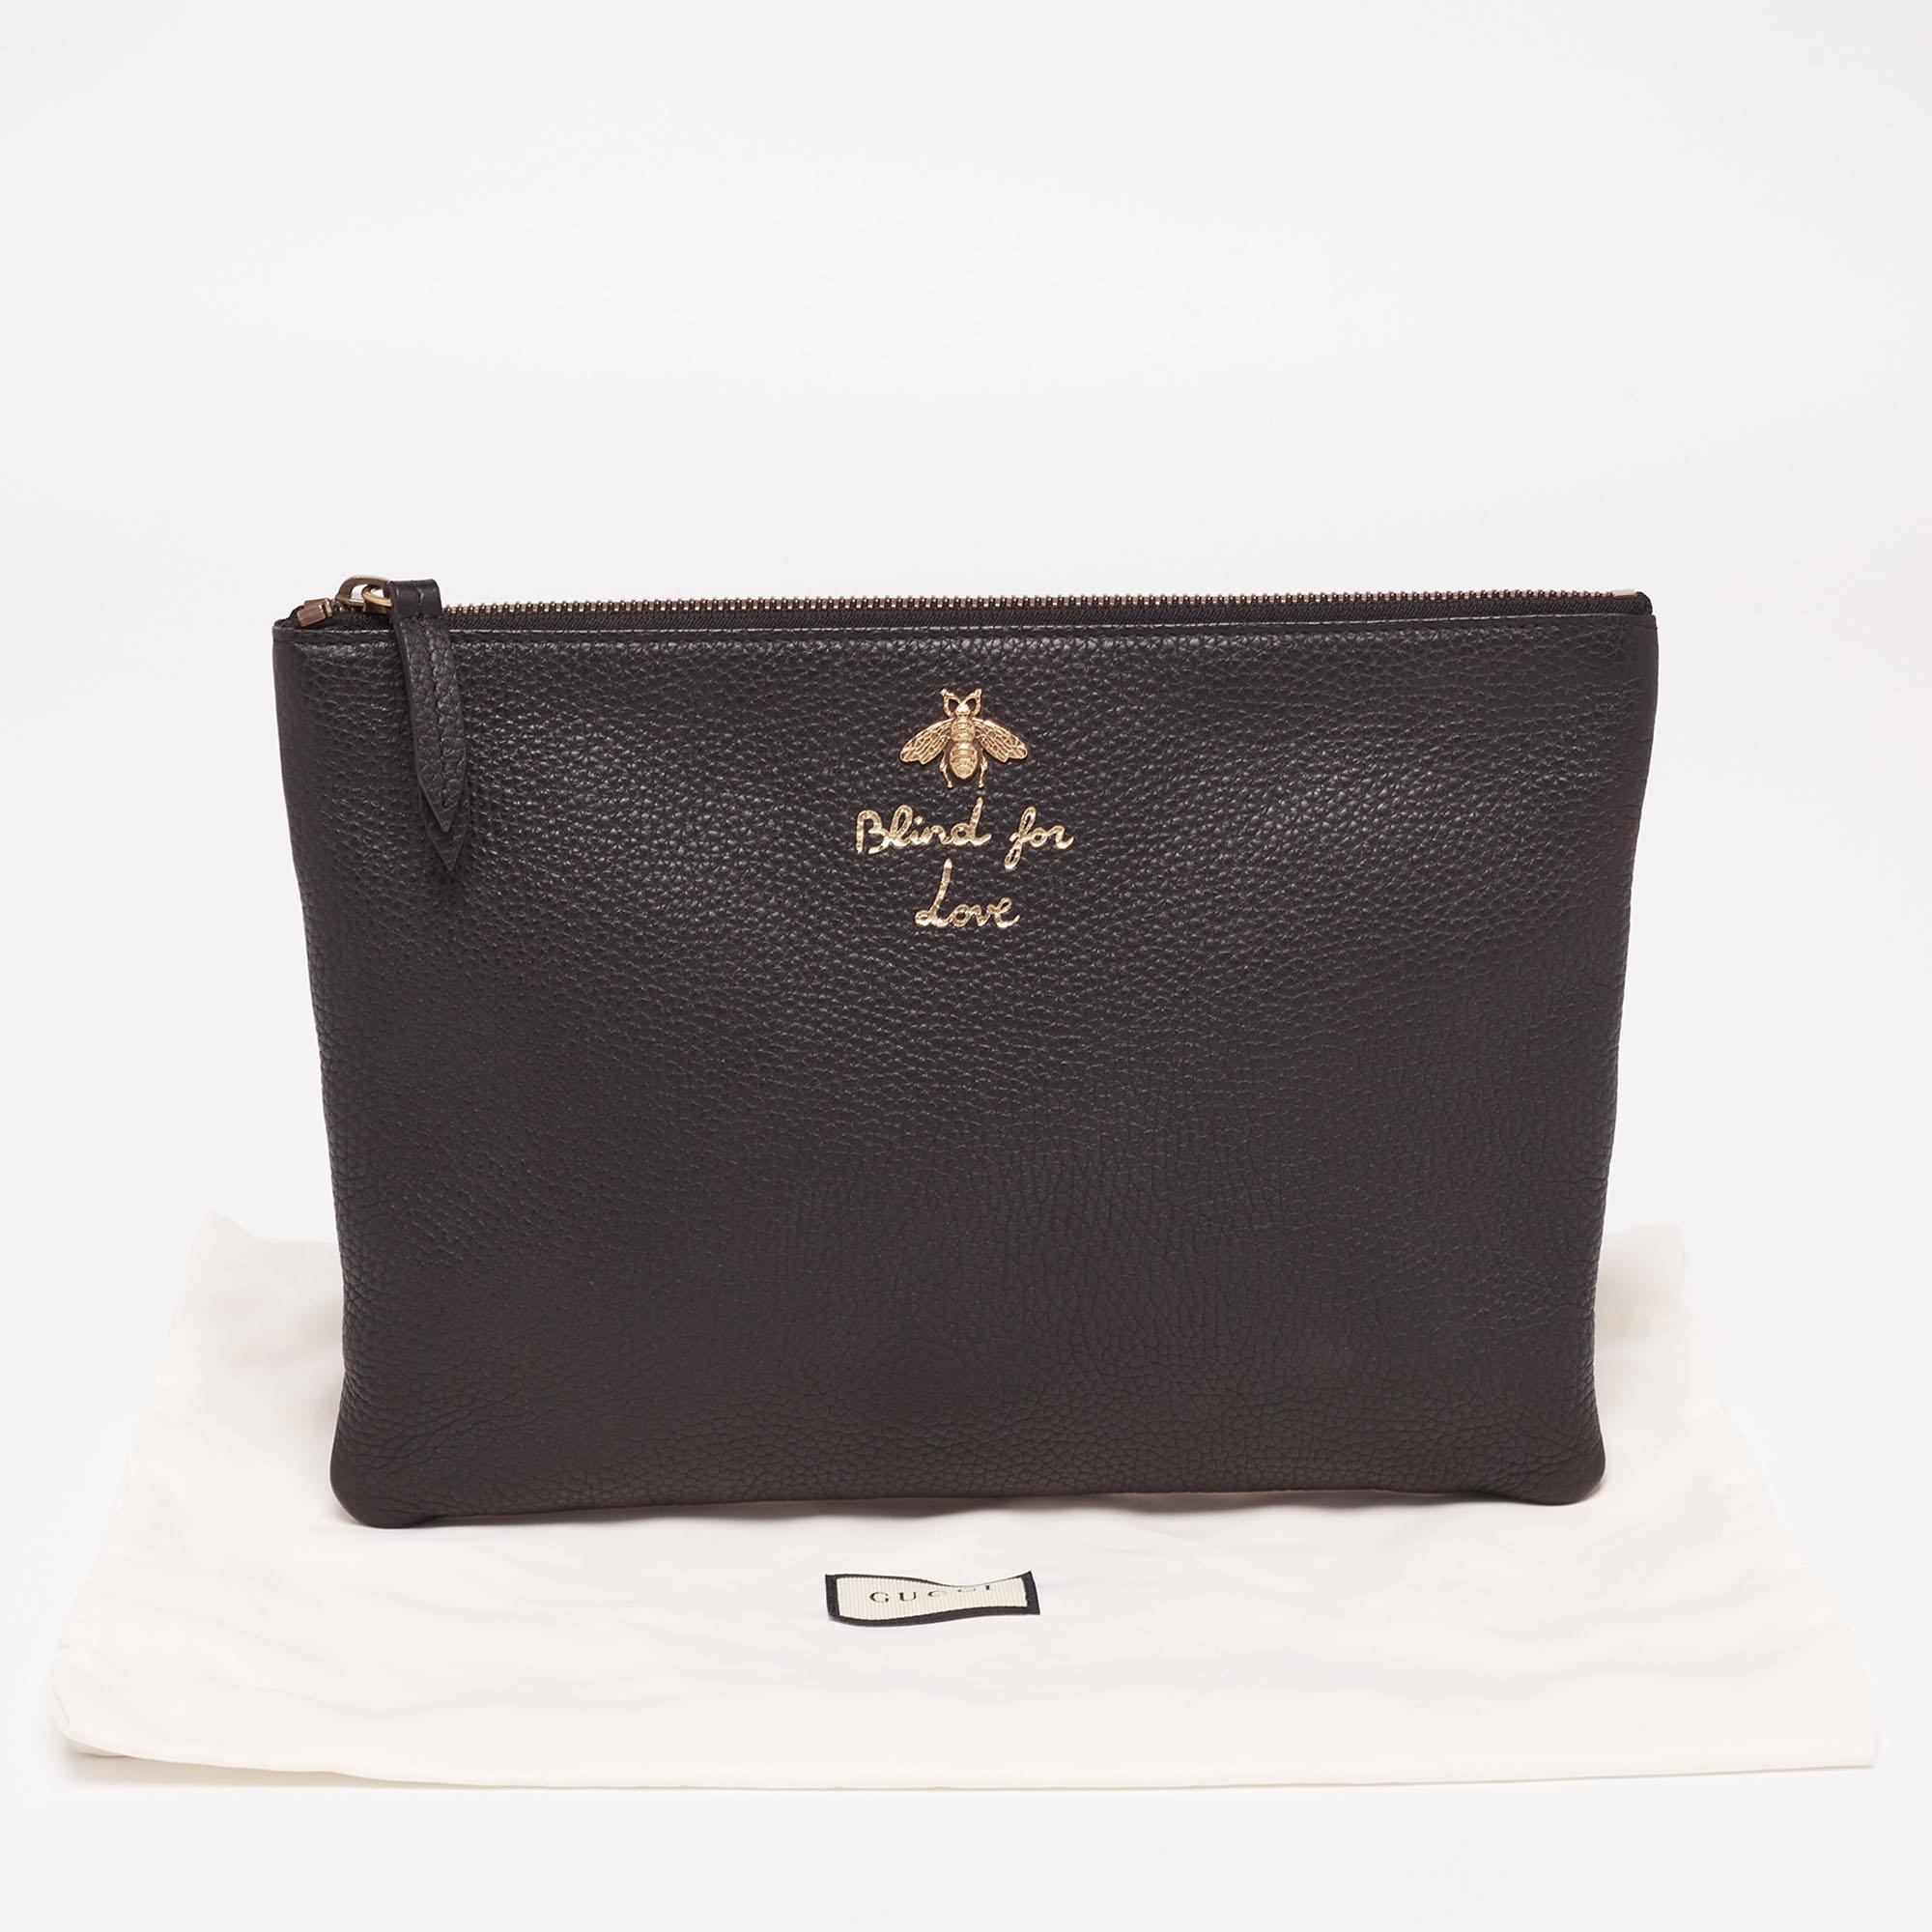 Gucci Black Blind for Love Leather Clutch 8